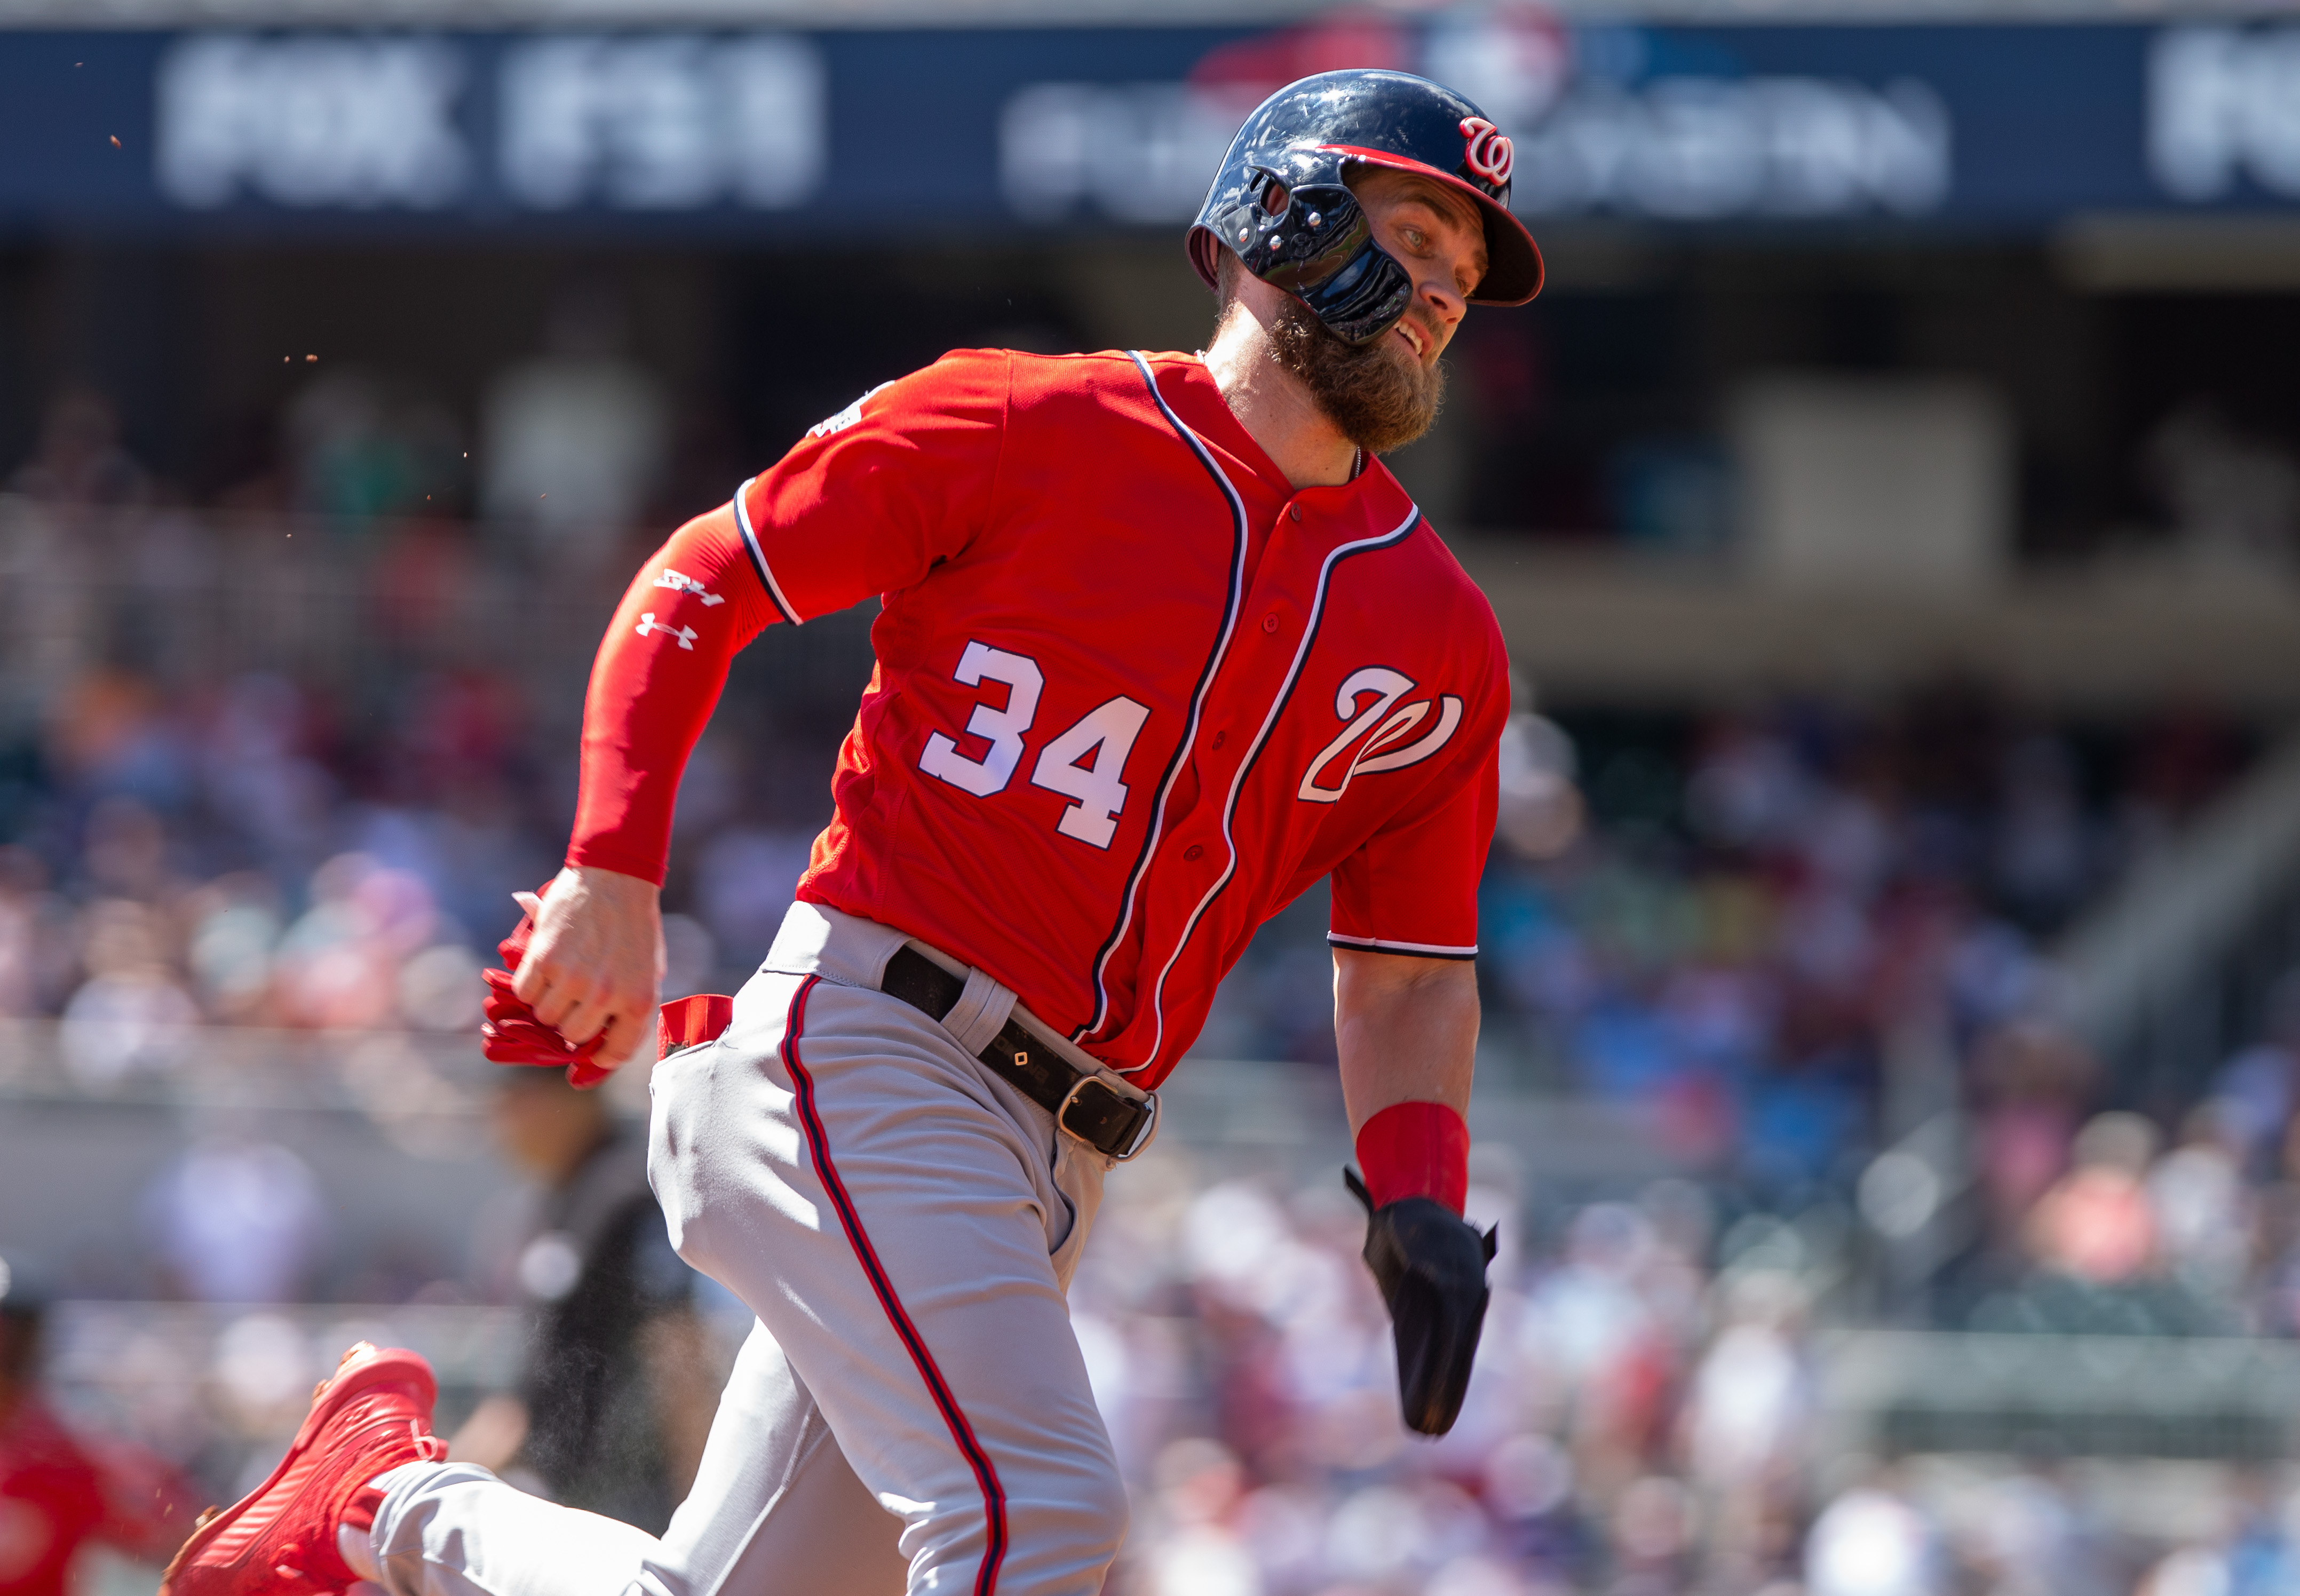 ATLANTA, GA - SEPTEMBER 15: Bryce Harper #34 of the Washington Nationals rounds third base and heads toward home as part of a 3 run 6th inning against the Atlanta Braves at SunTrust Park on September 15, 2018 in Atlanta, Georgia.(Photo by Kelly Kline/GettyImages)